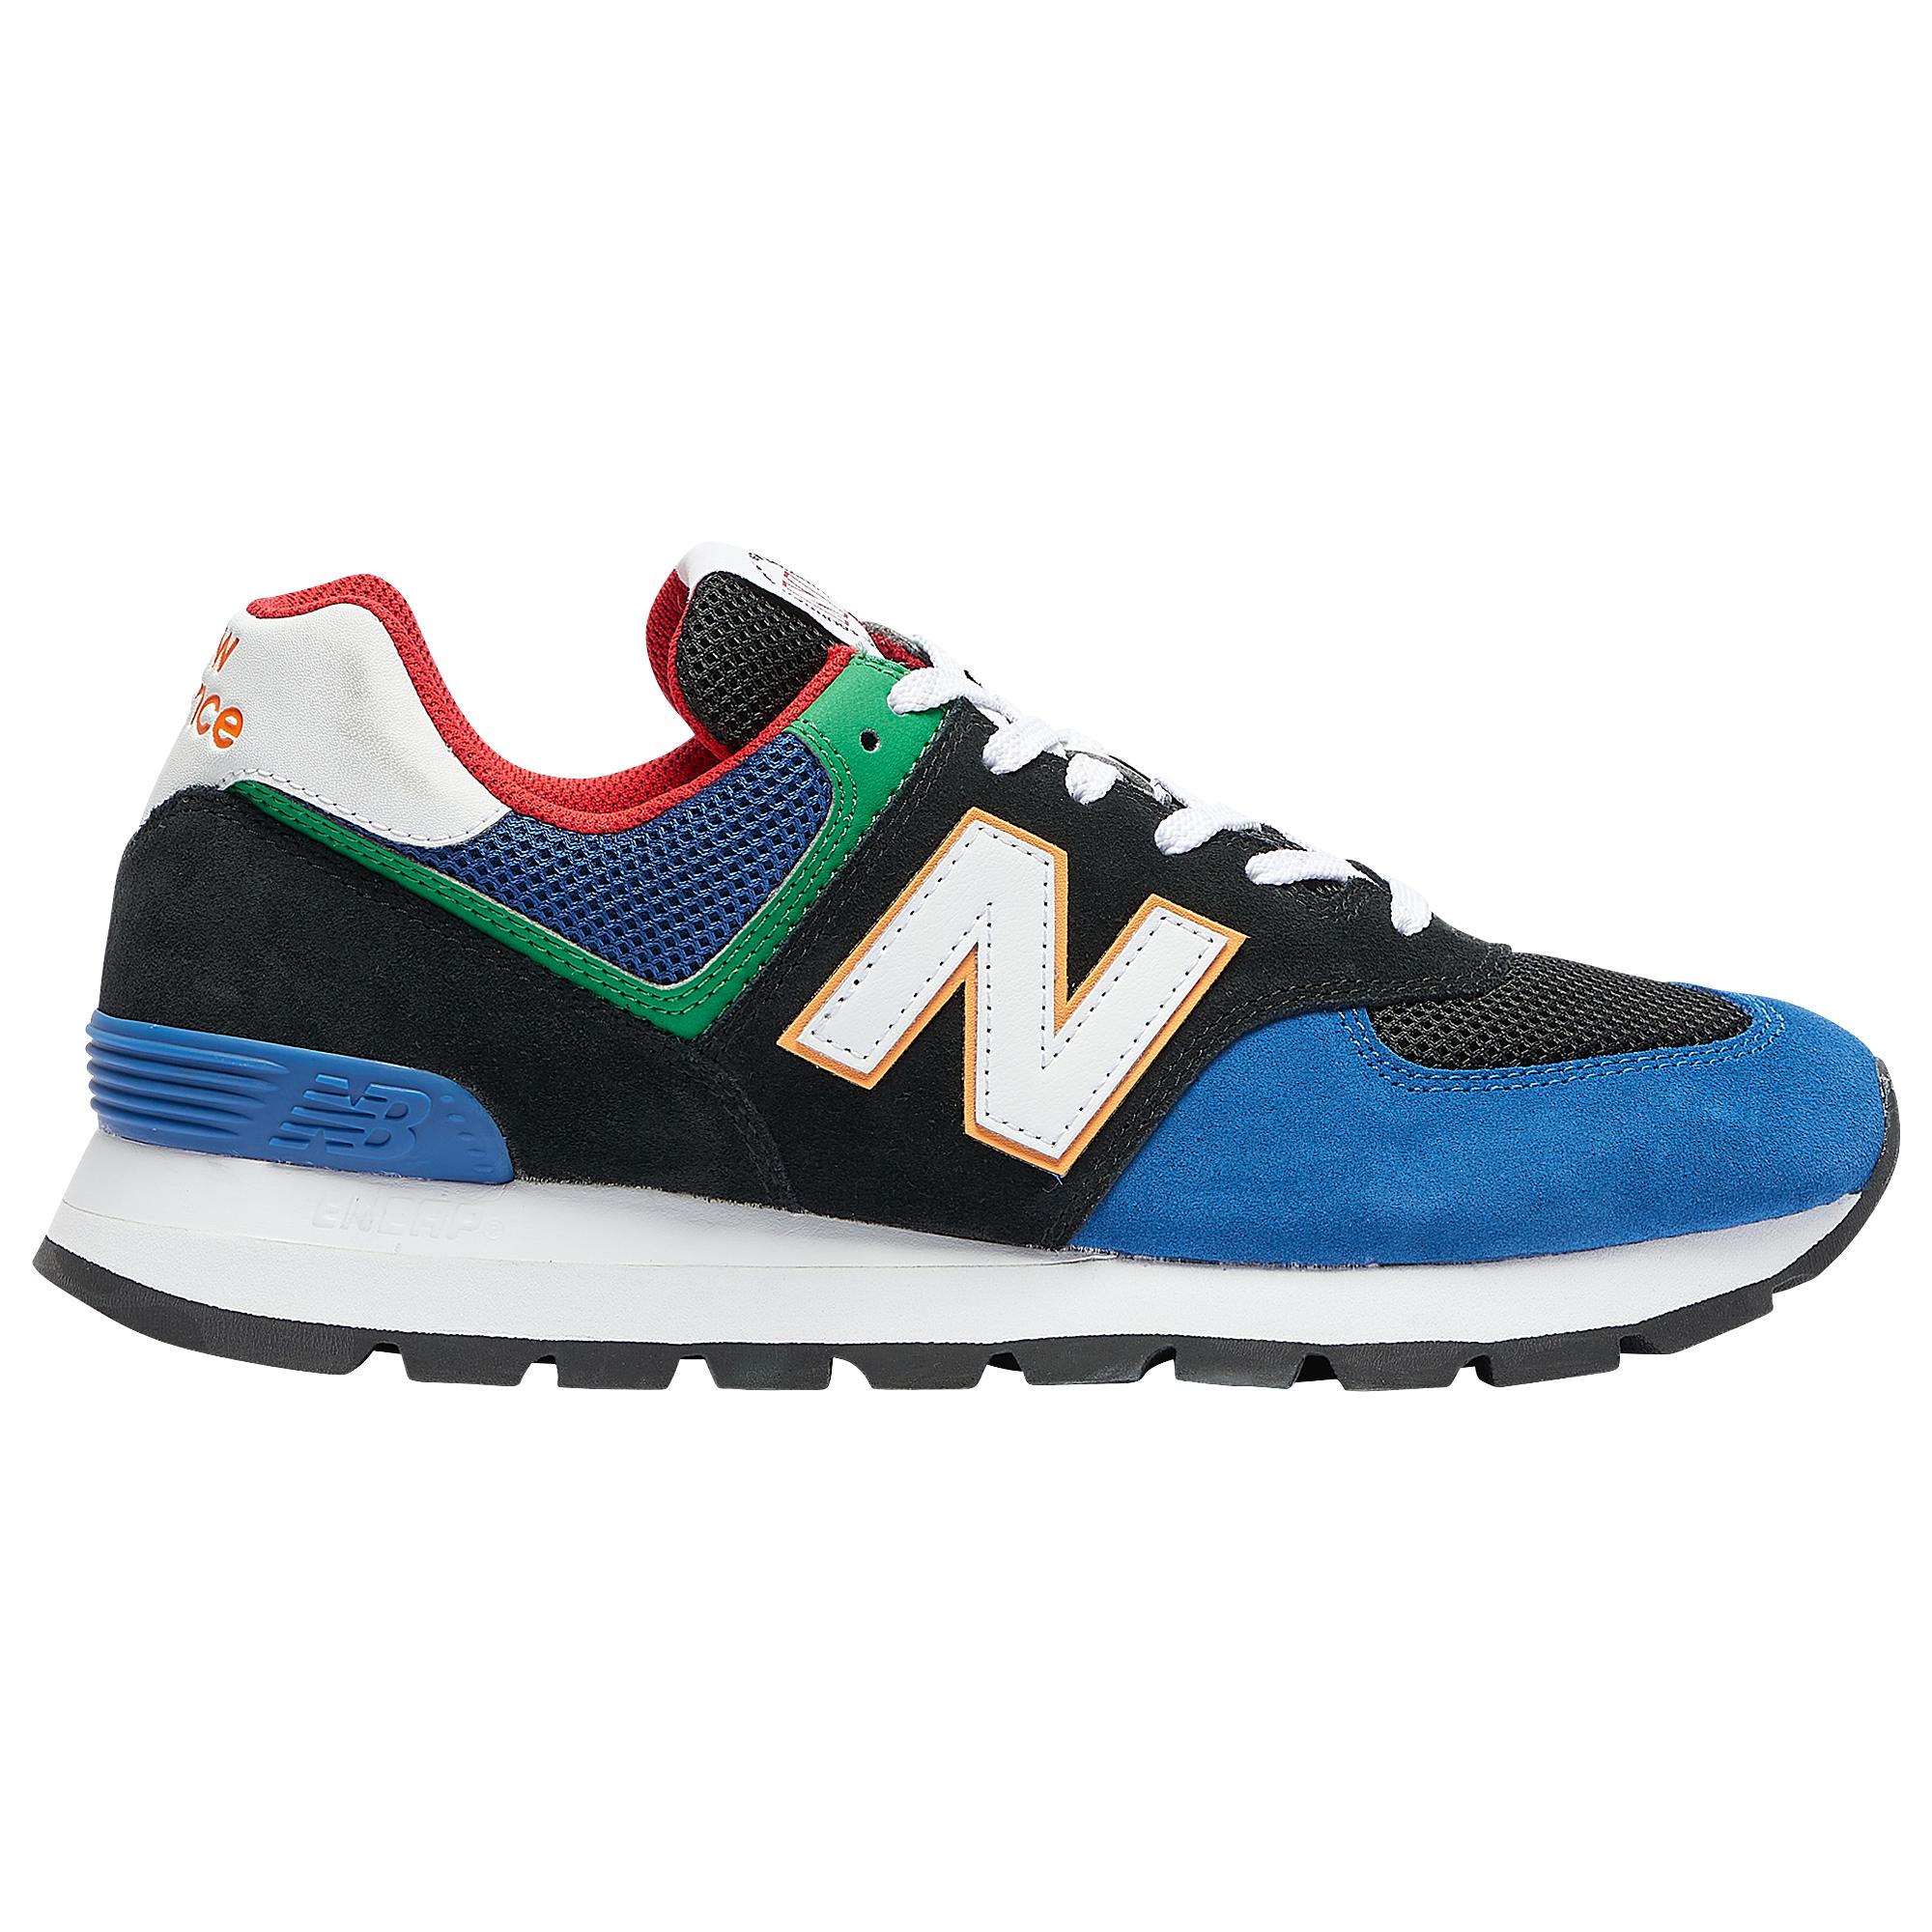 New Balance Suede 574 Rugged in Blue for Men - Save 7% - Lyst